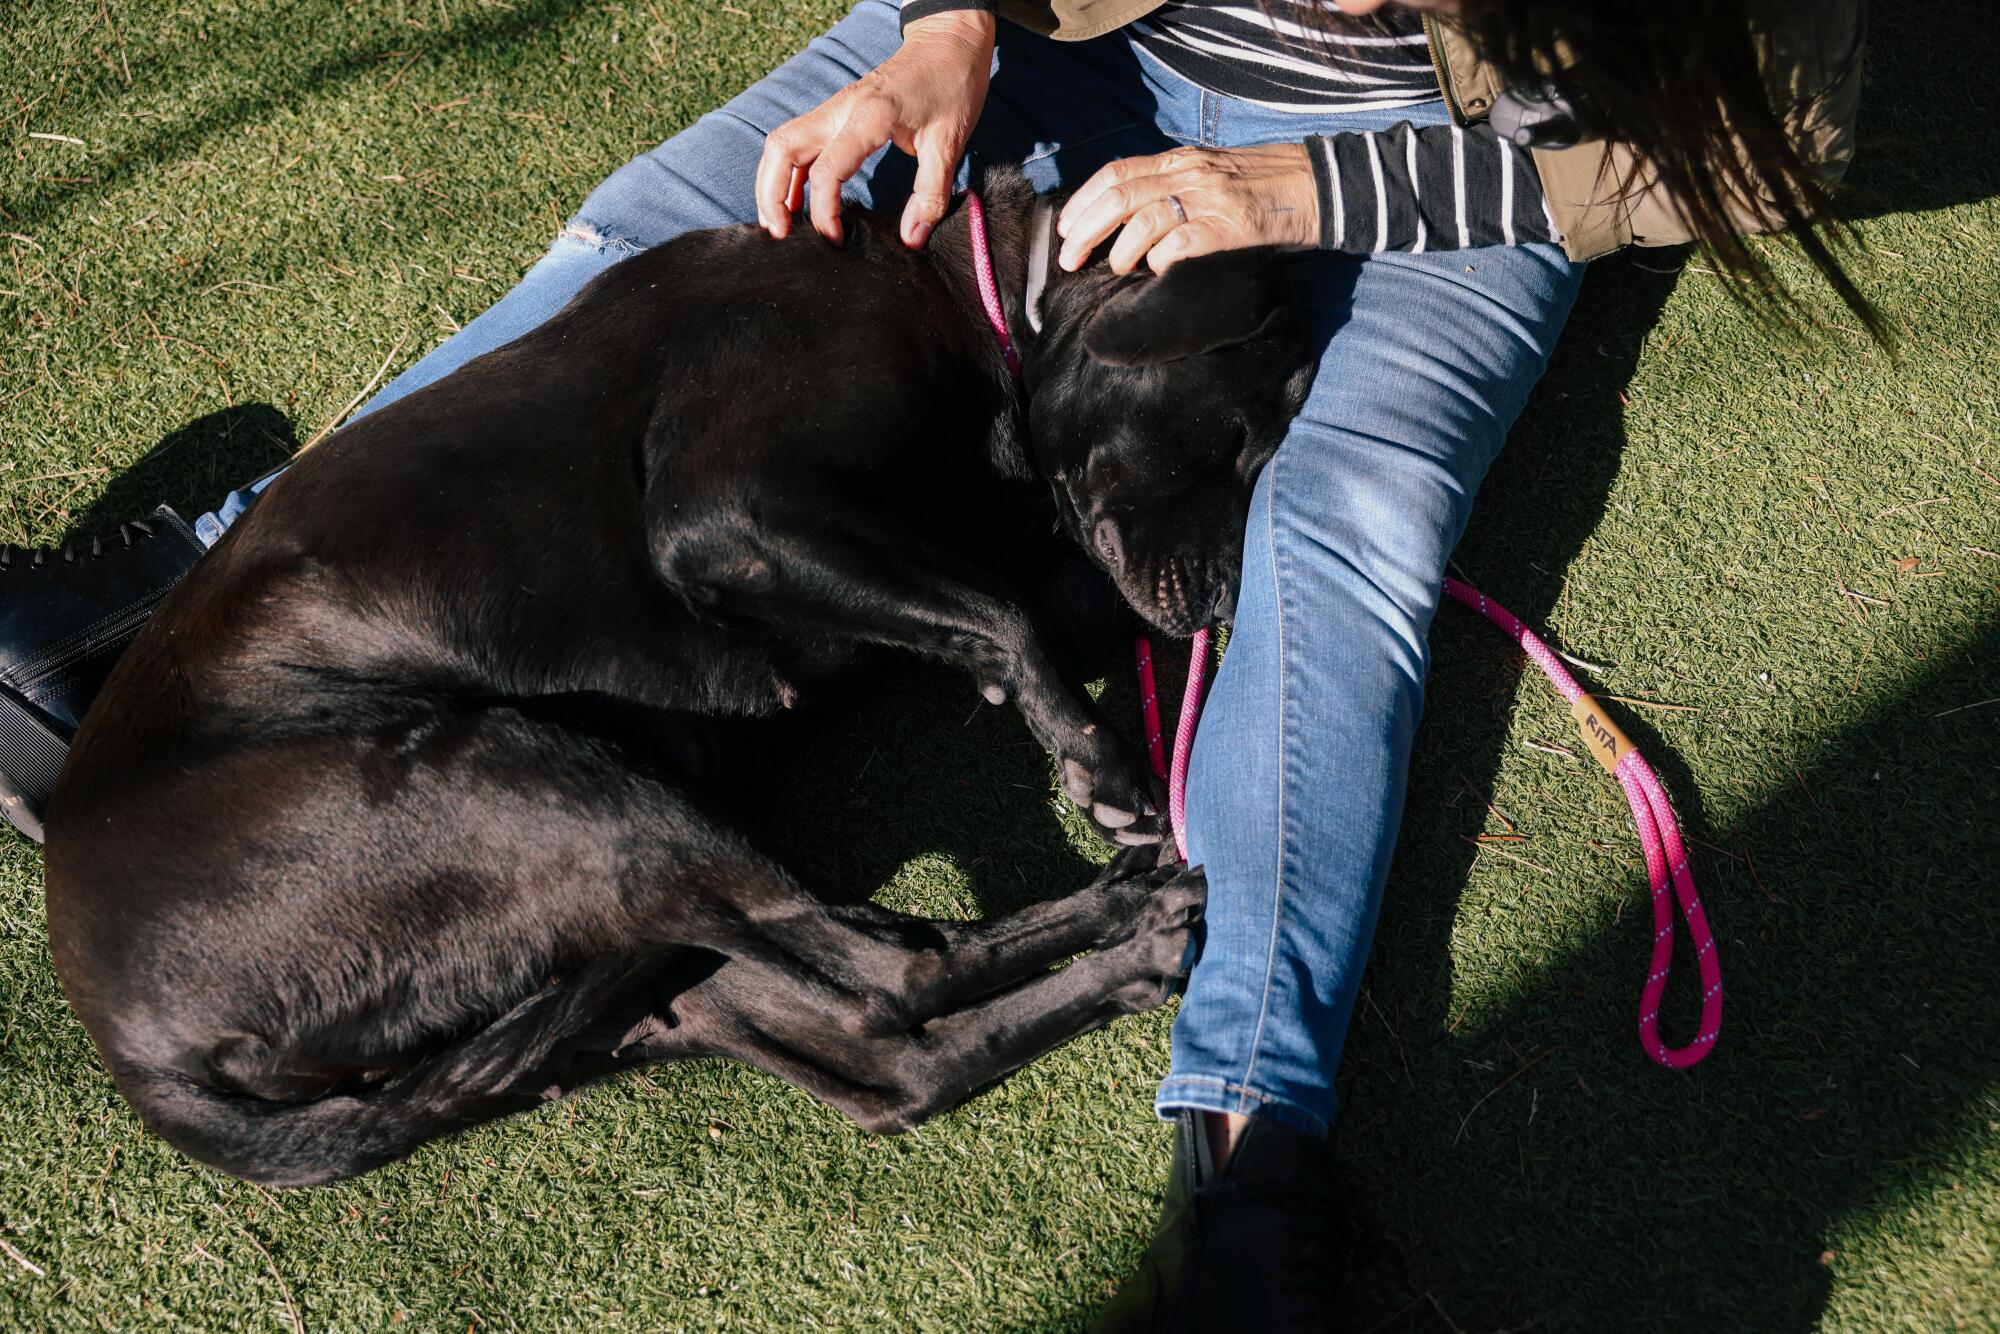 Rita Earl Blackwell connects with Raven in the play yard at the Lancaster Animal Care Center.